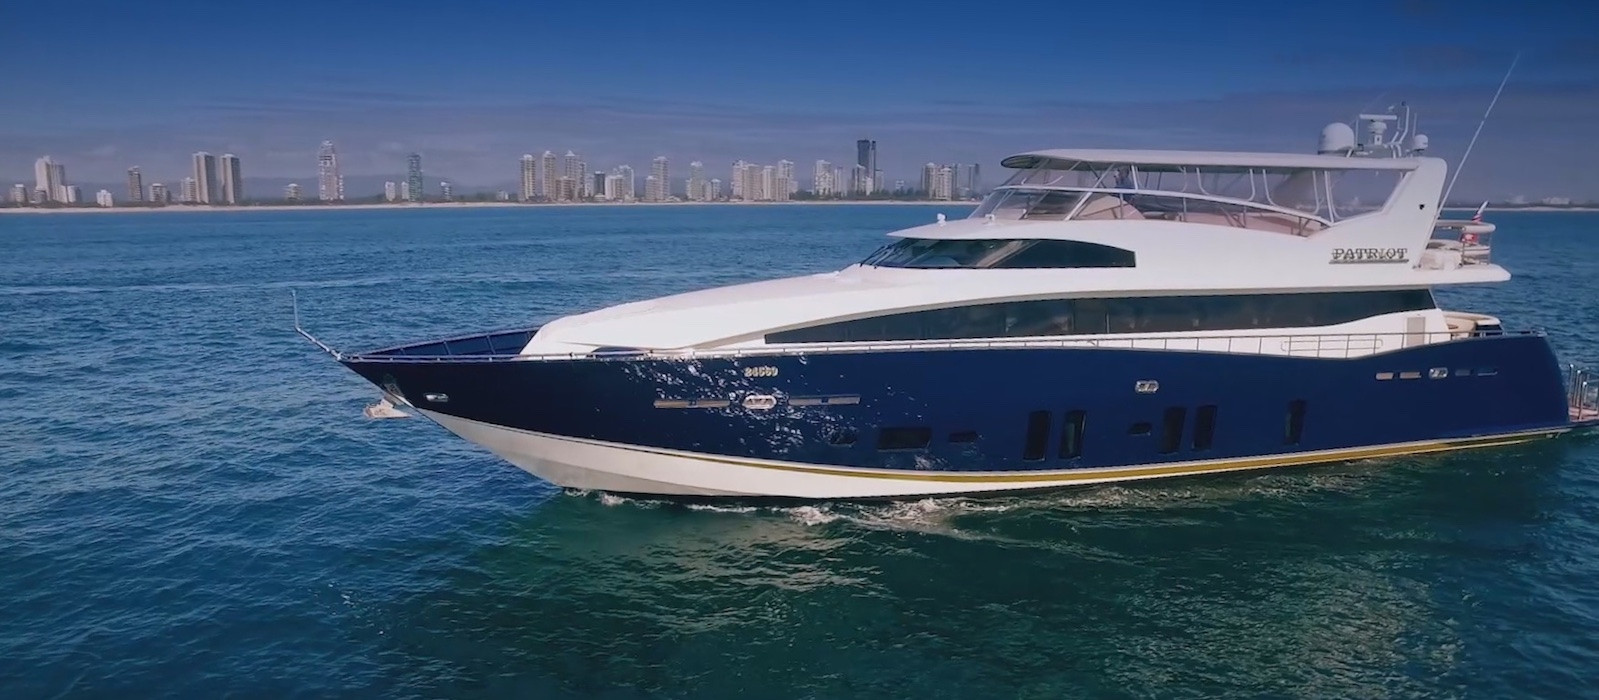 Side view of Patriot 1 super yacht hire 